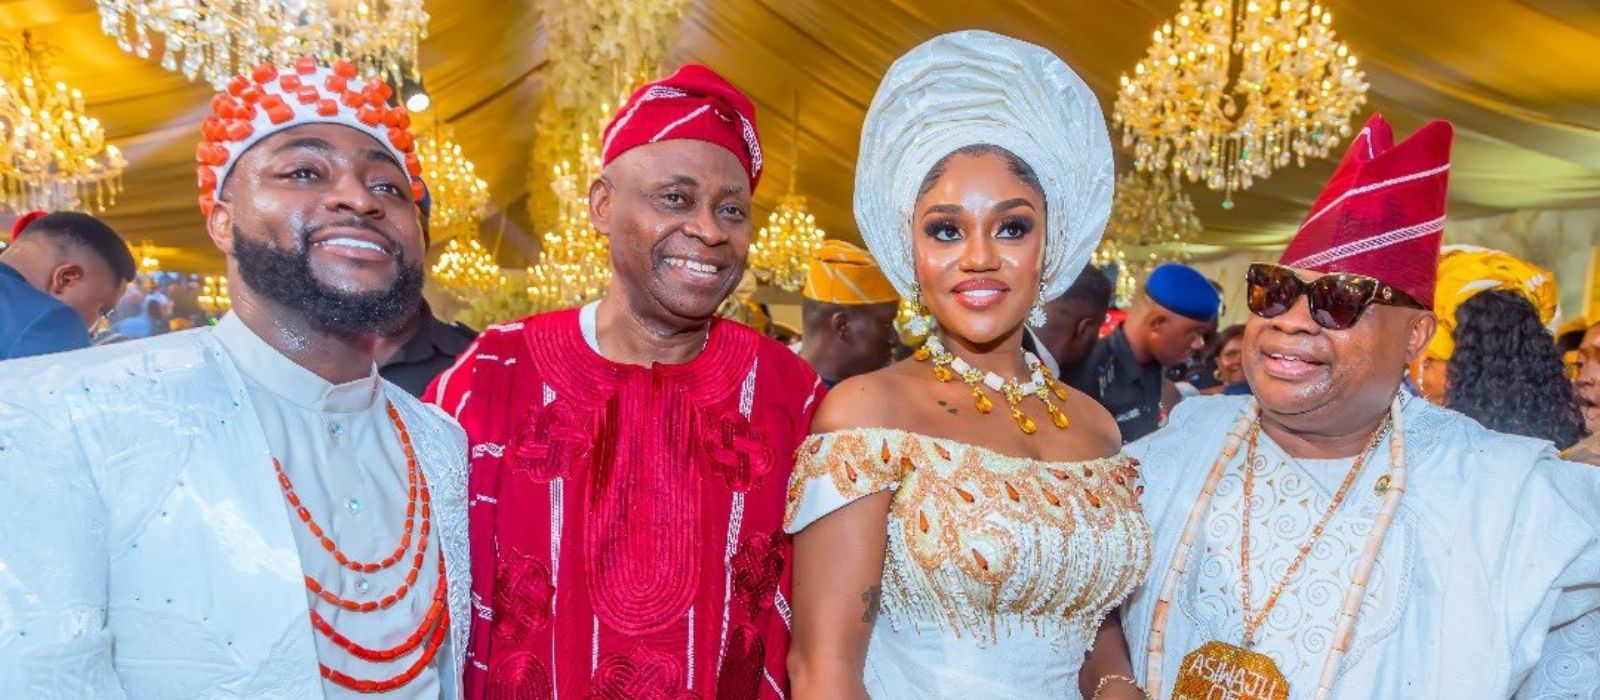 Davido and Chioma Rowland tie the knot in spectacular Lagos ceremony